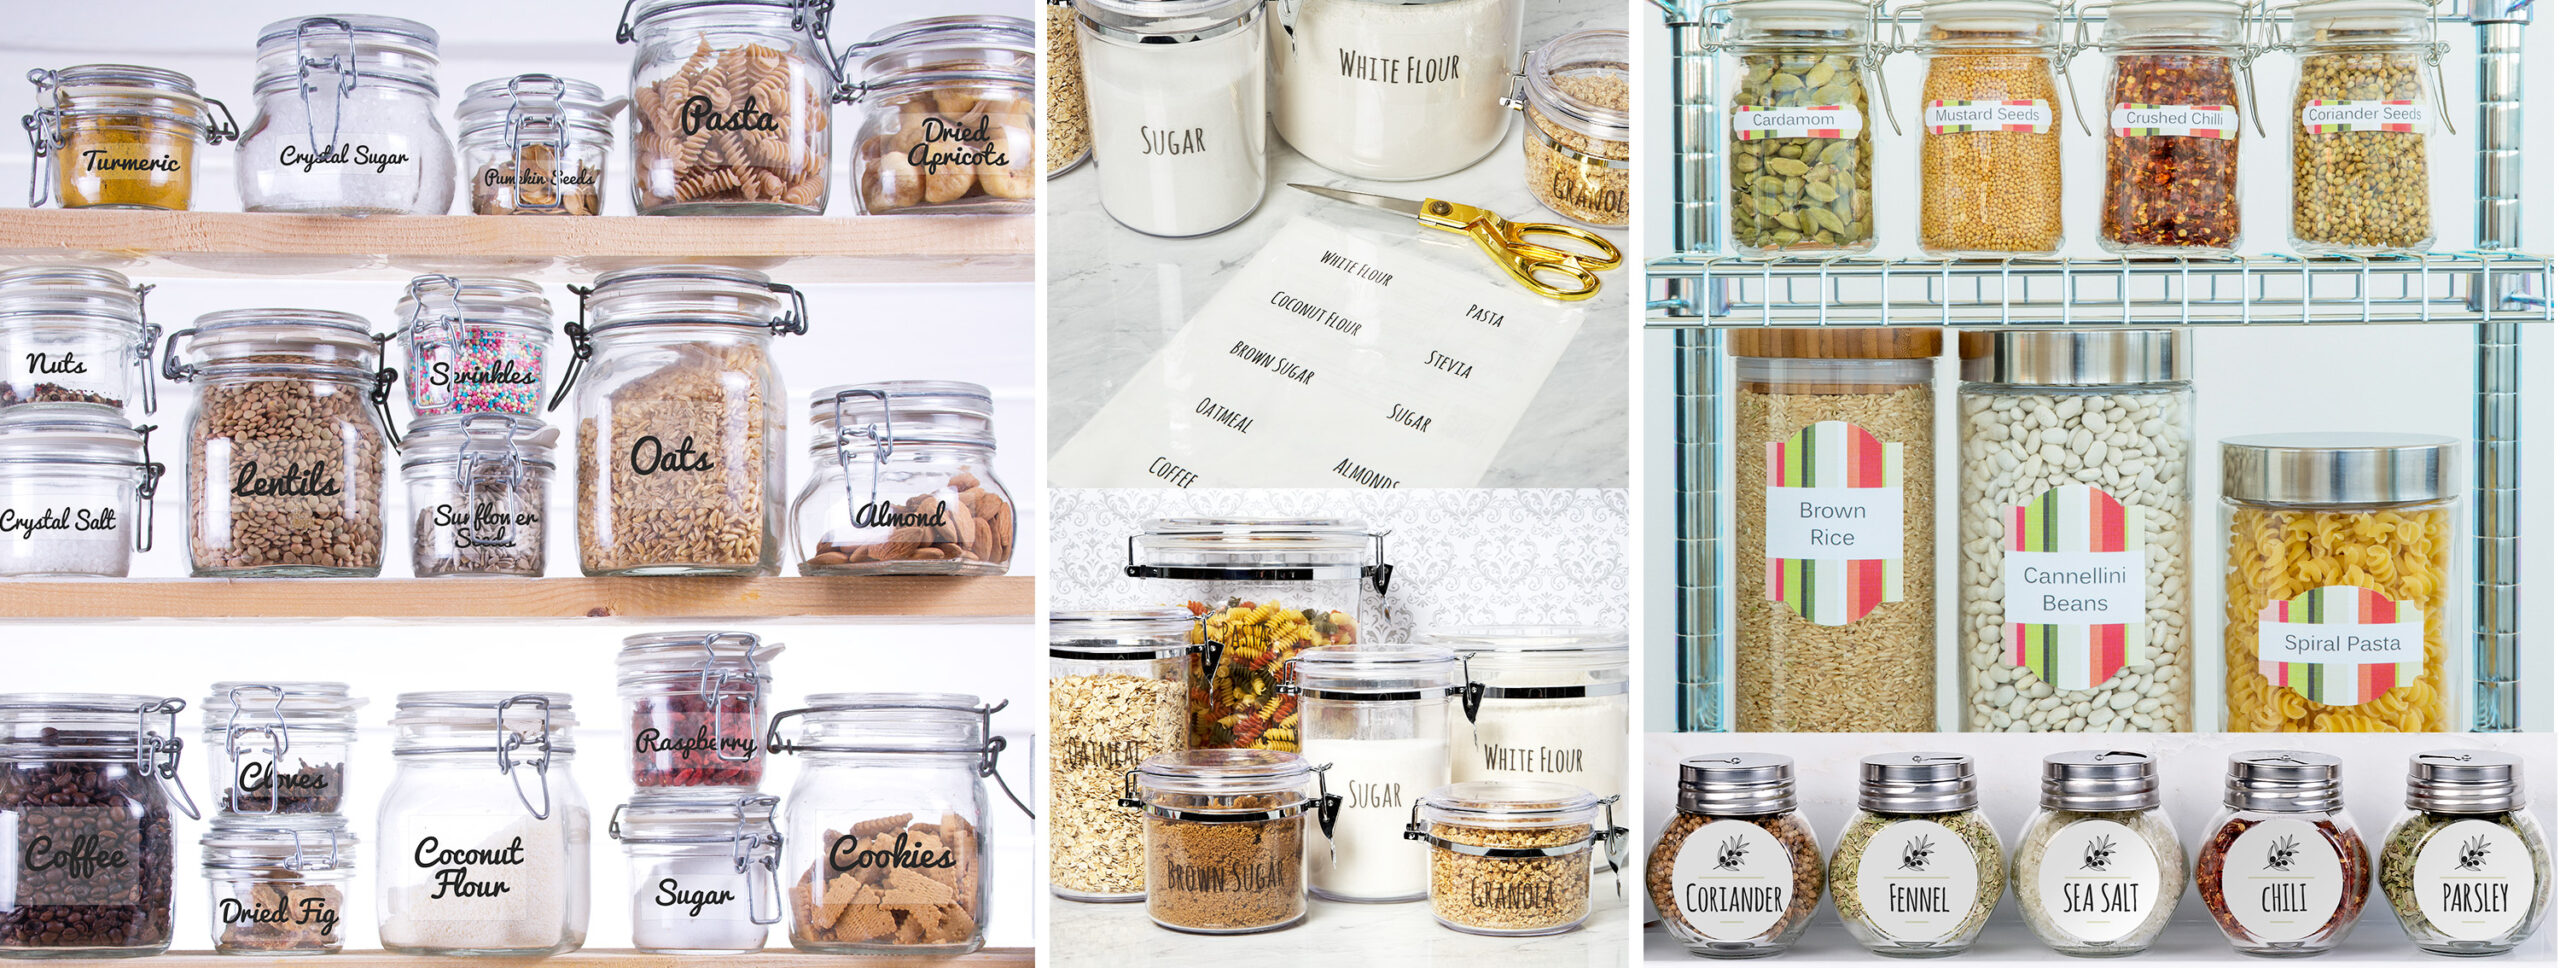 https://www.avery.com/blog/wp-content/uploads/2020/04/7-essential-pantry-organization-ideas-for-insta-worthy-kitchen-of-your-dreams-scaled.jpg